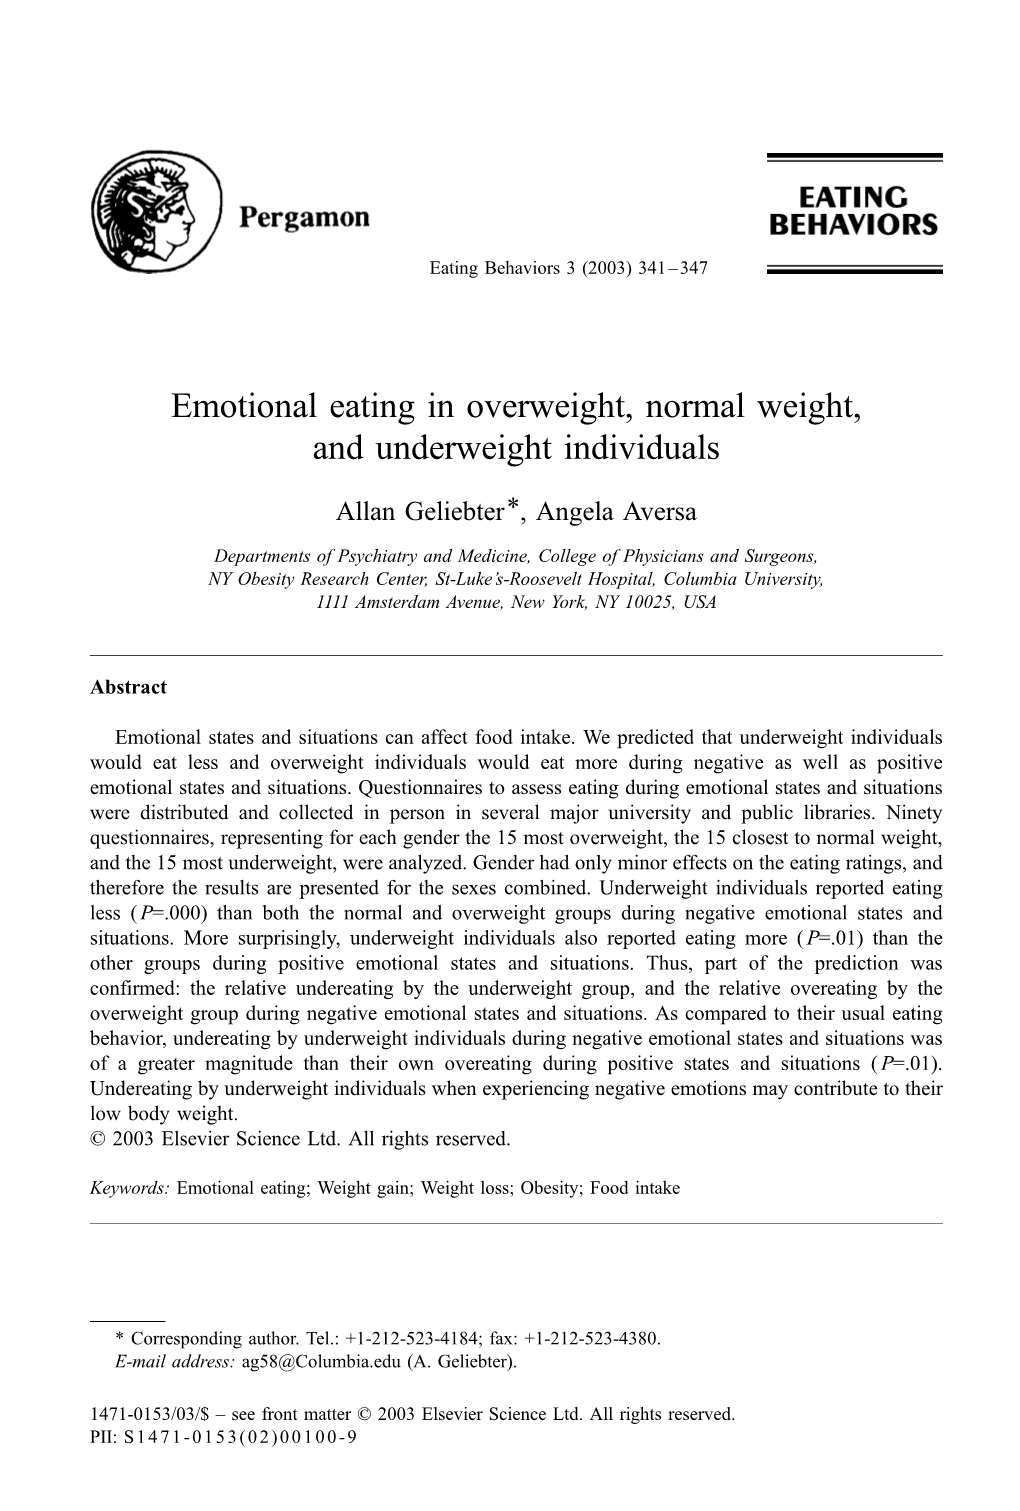 Emotional Eating in Overweight, Normal Weight, and Underweight Individuals